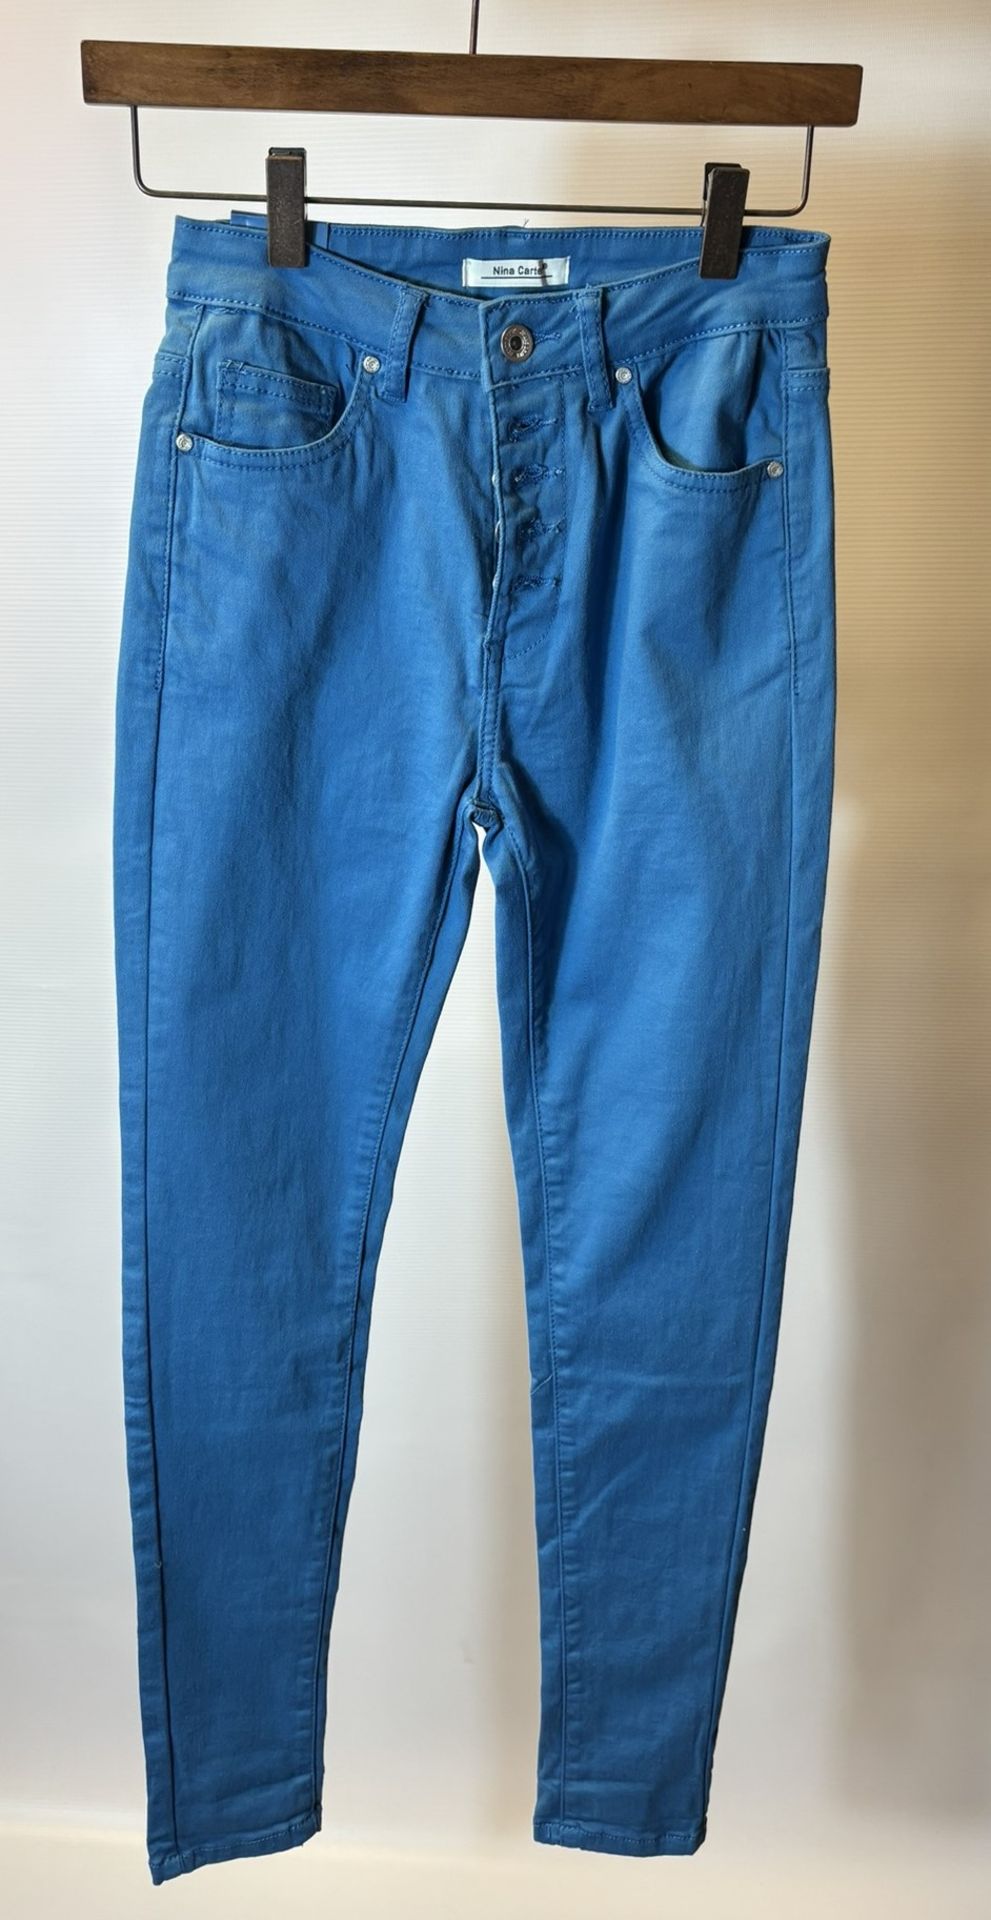 12 x Various Pairs Of Women's Trousers/Jeans As Seen In Photos - Image 31 of 36